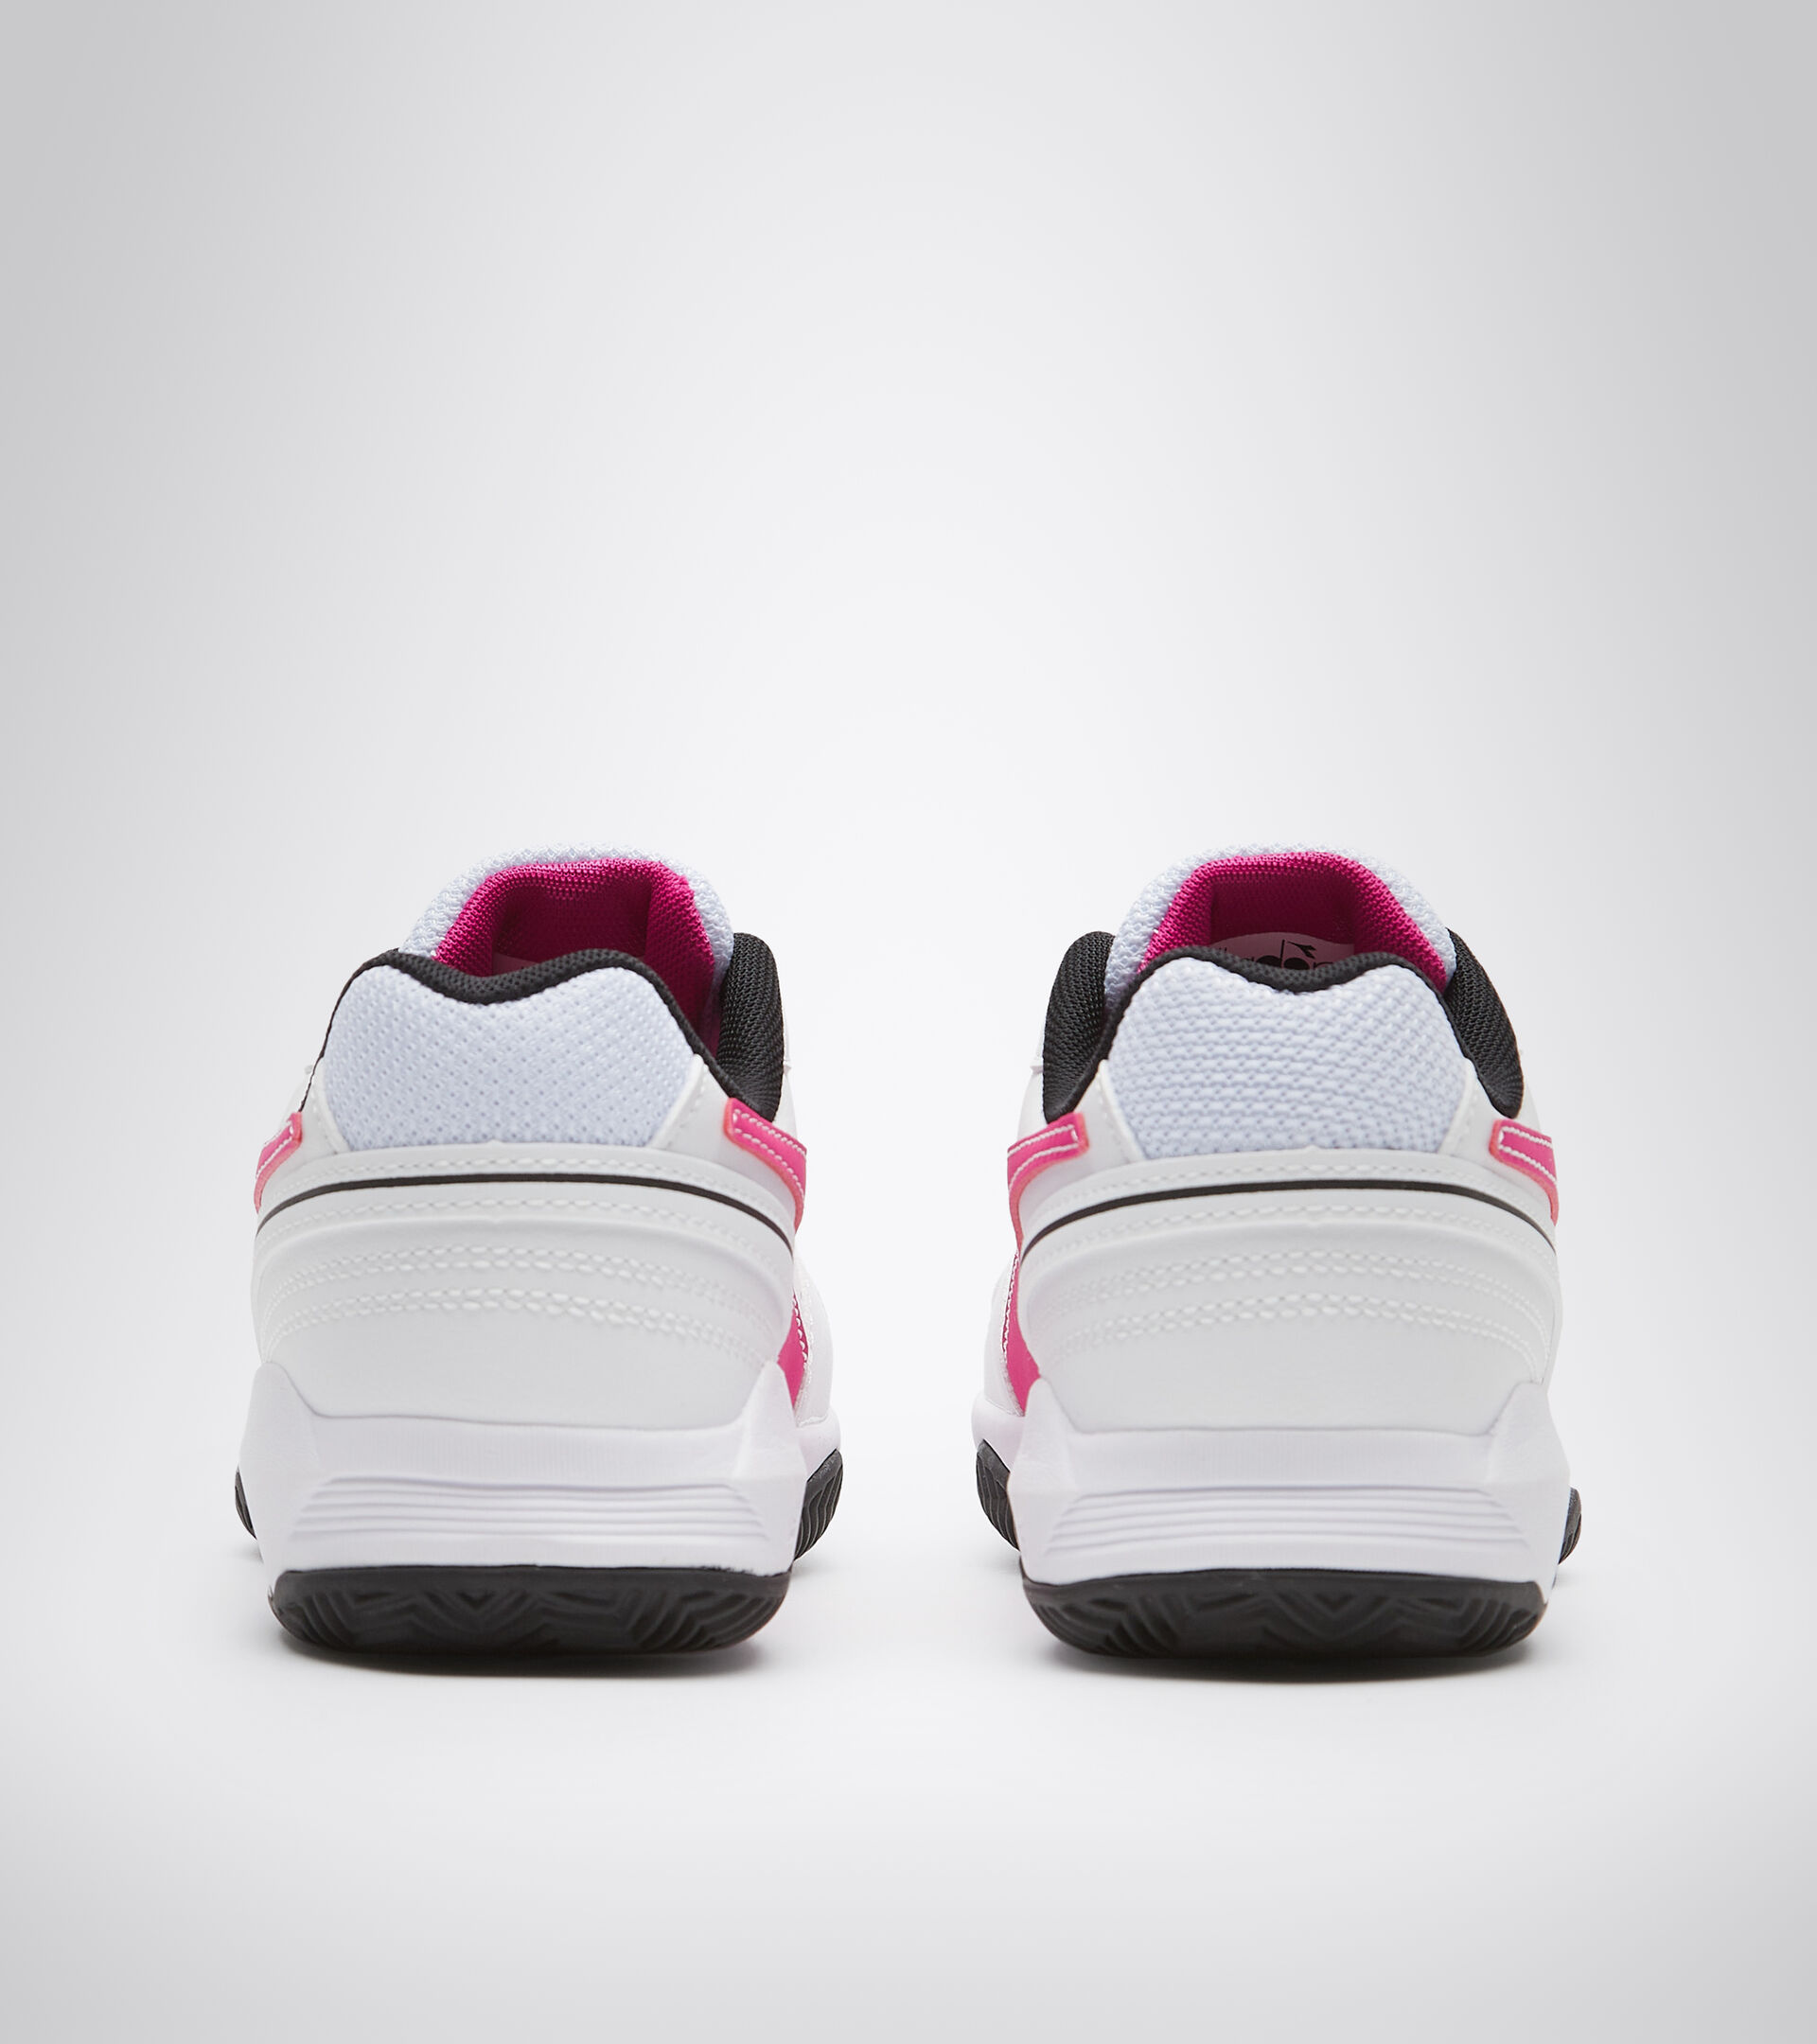 Tennis shoes for clay courts - Women S. CHALLENGE 4 W SL CLAY WHITE/BLACK/RHODAMINE RED c - Diadora